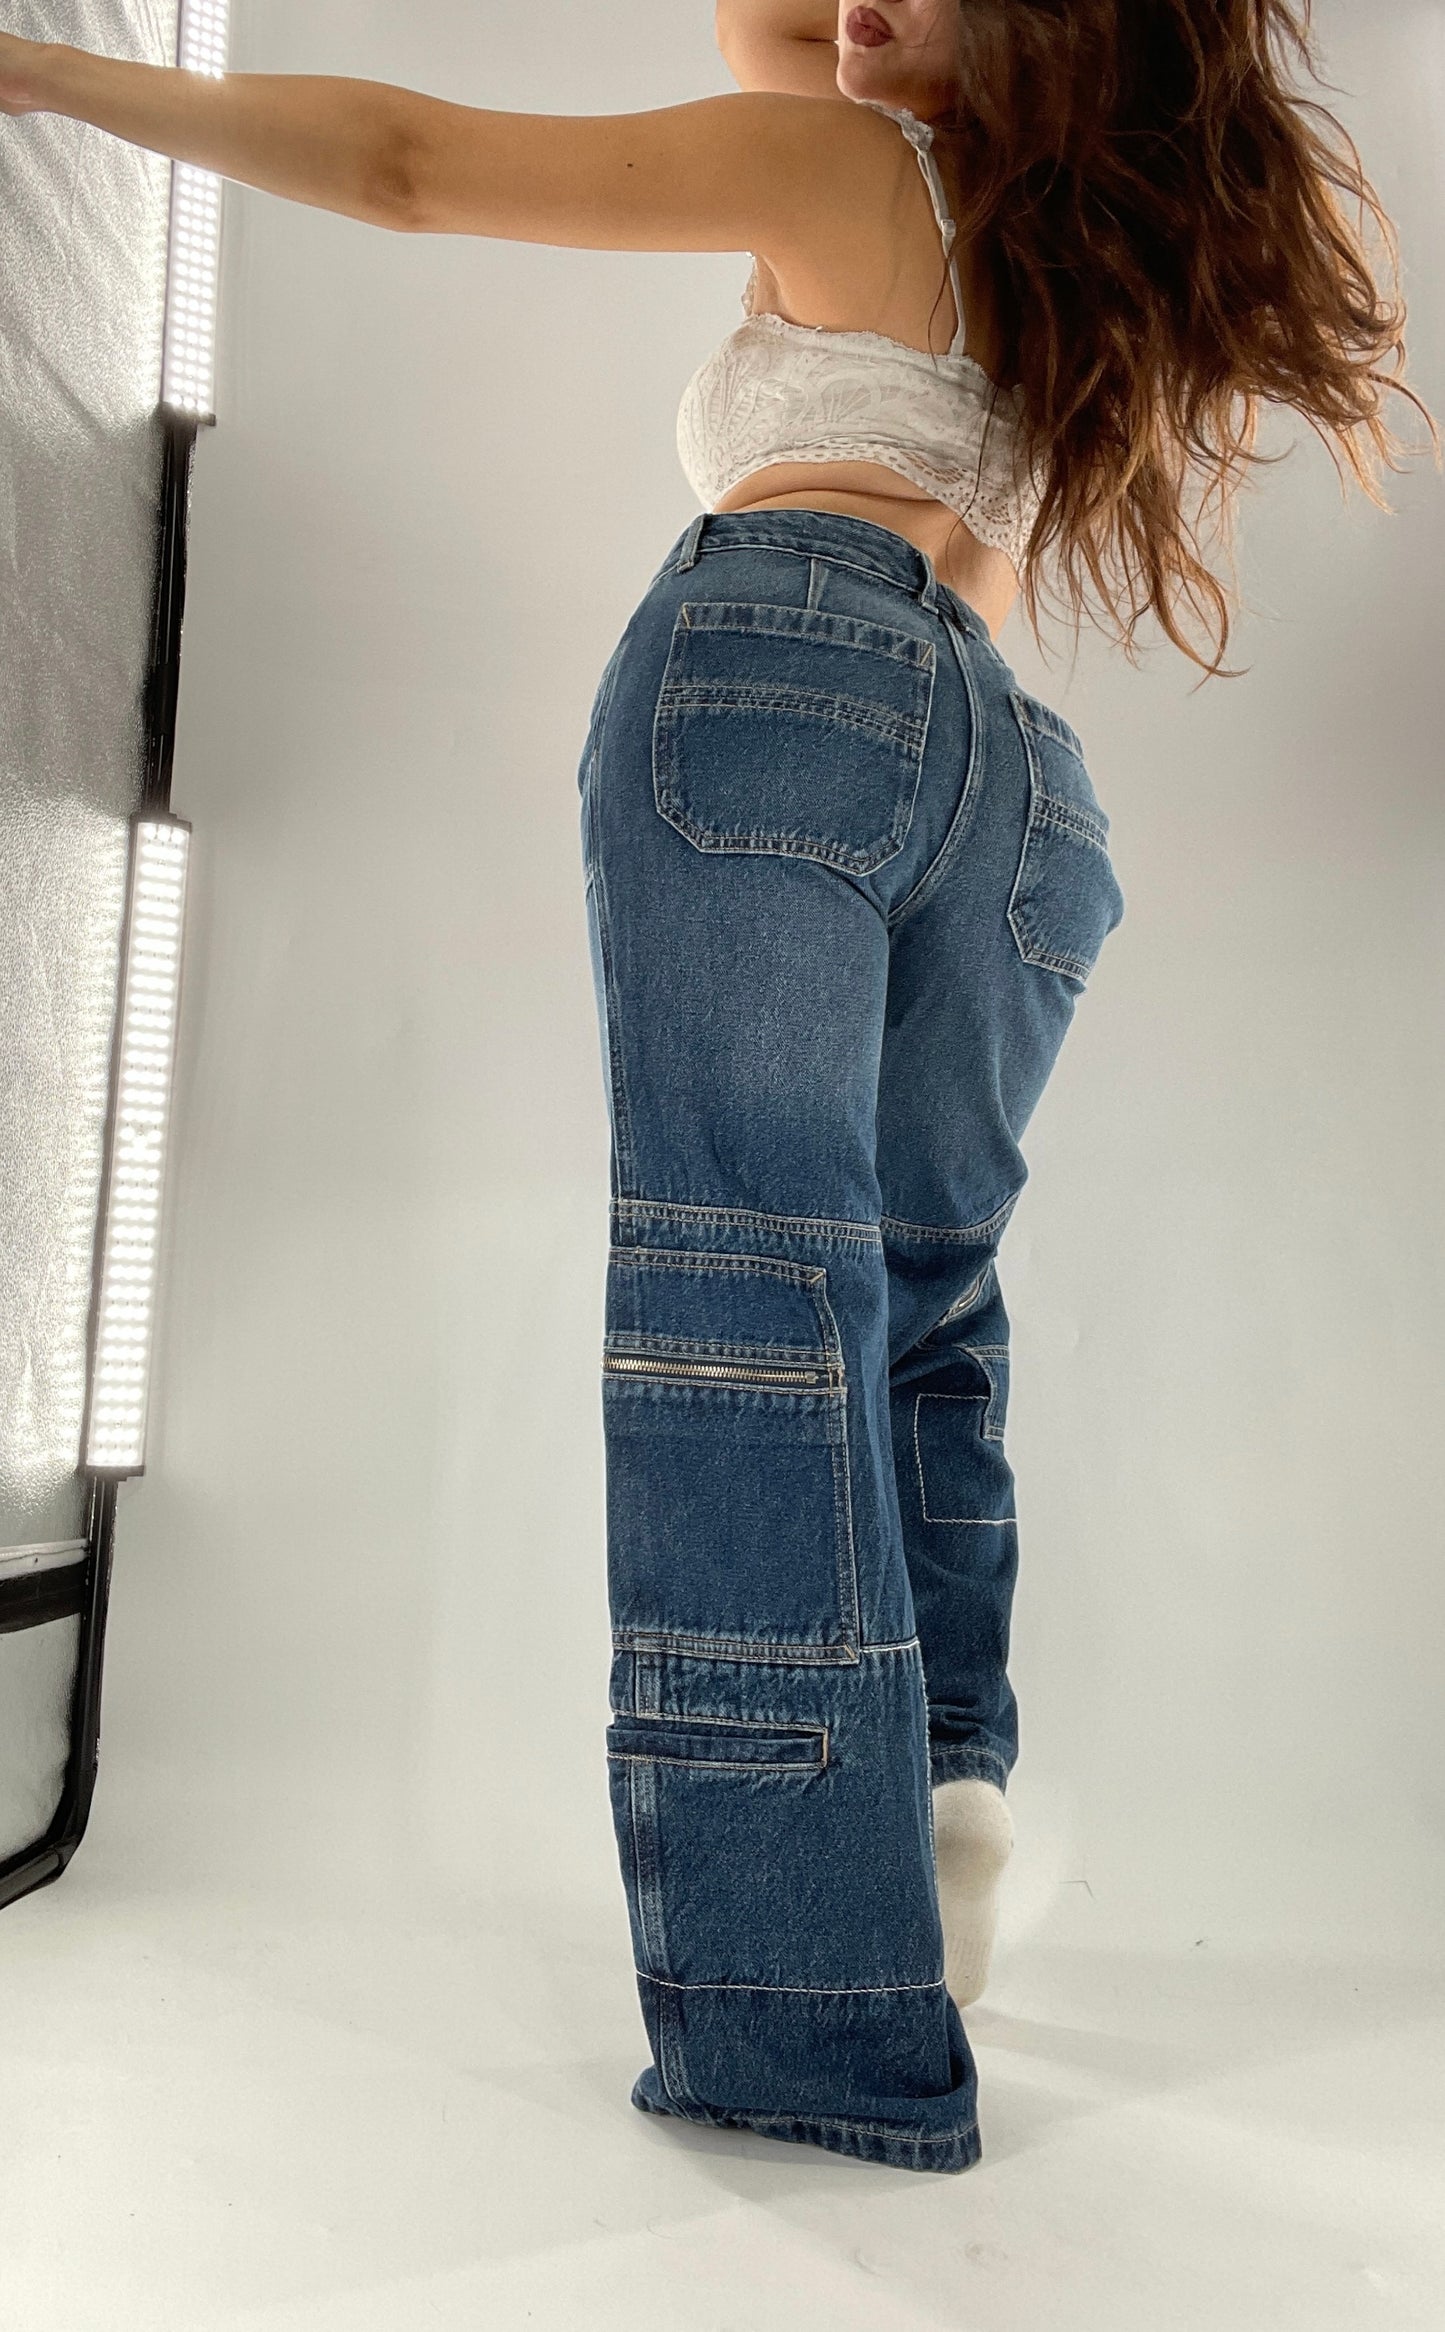 Free People Medium Wash Baggy Straight Legs Jeans Covered in Zippers, Pockets, Stitching (28)